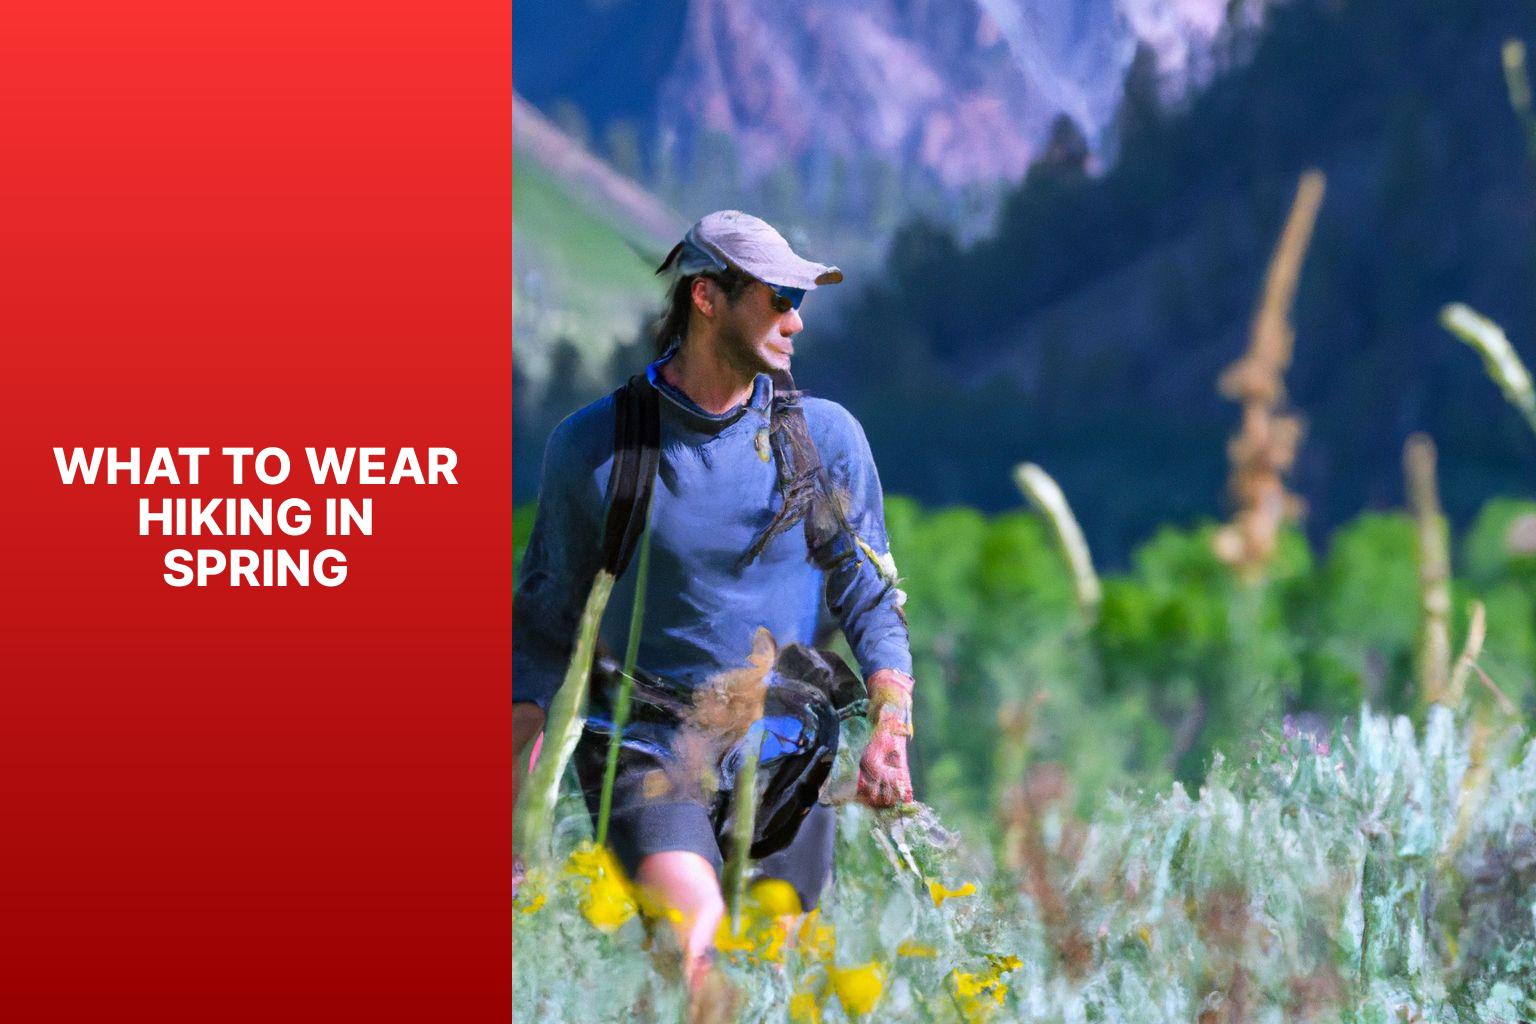 what to wear hiking in spring5p4d